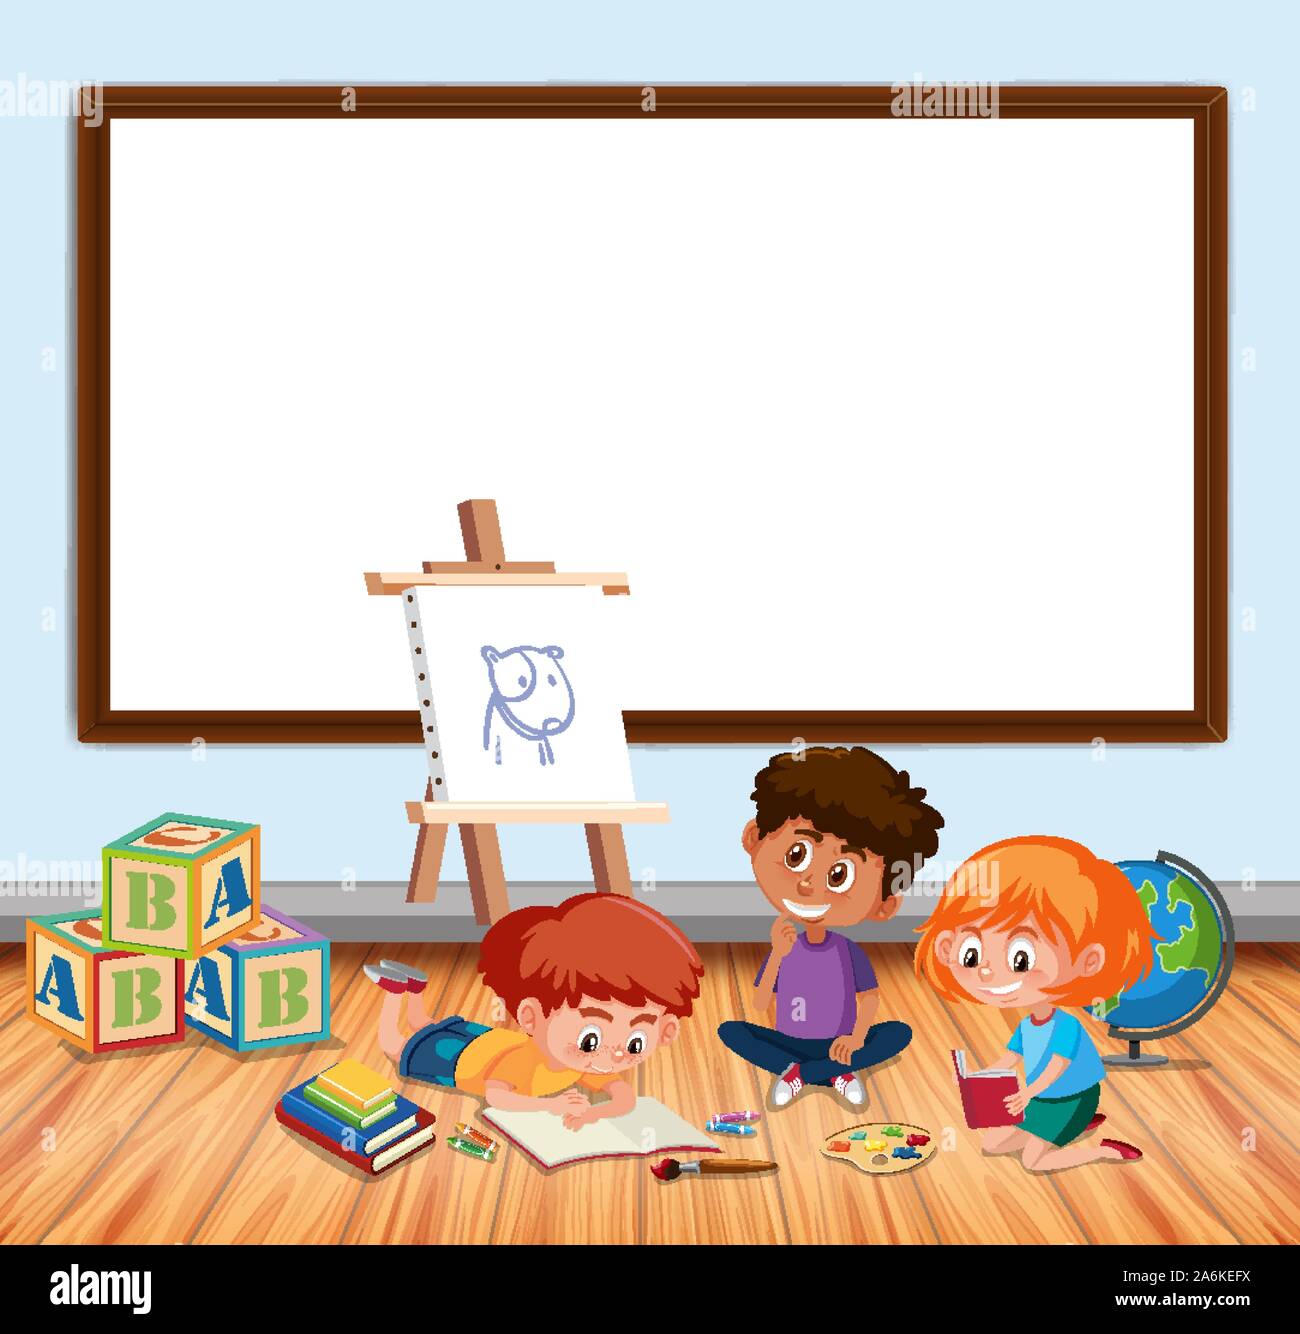 Frame design with board and kids in classroom illustration Stock Vector ...